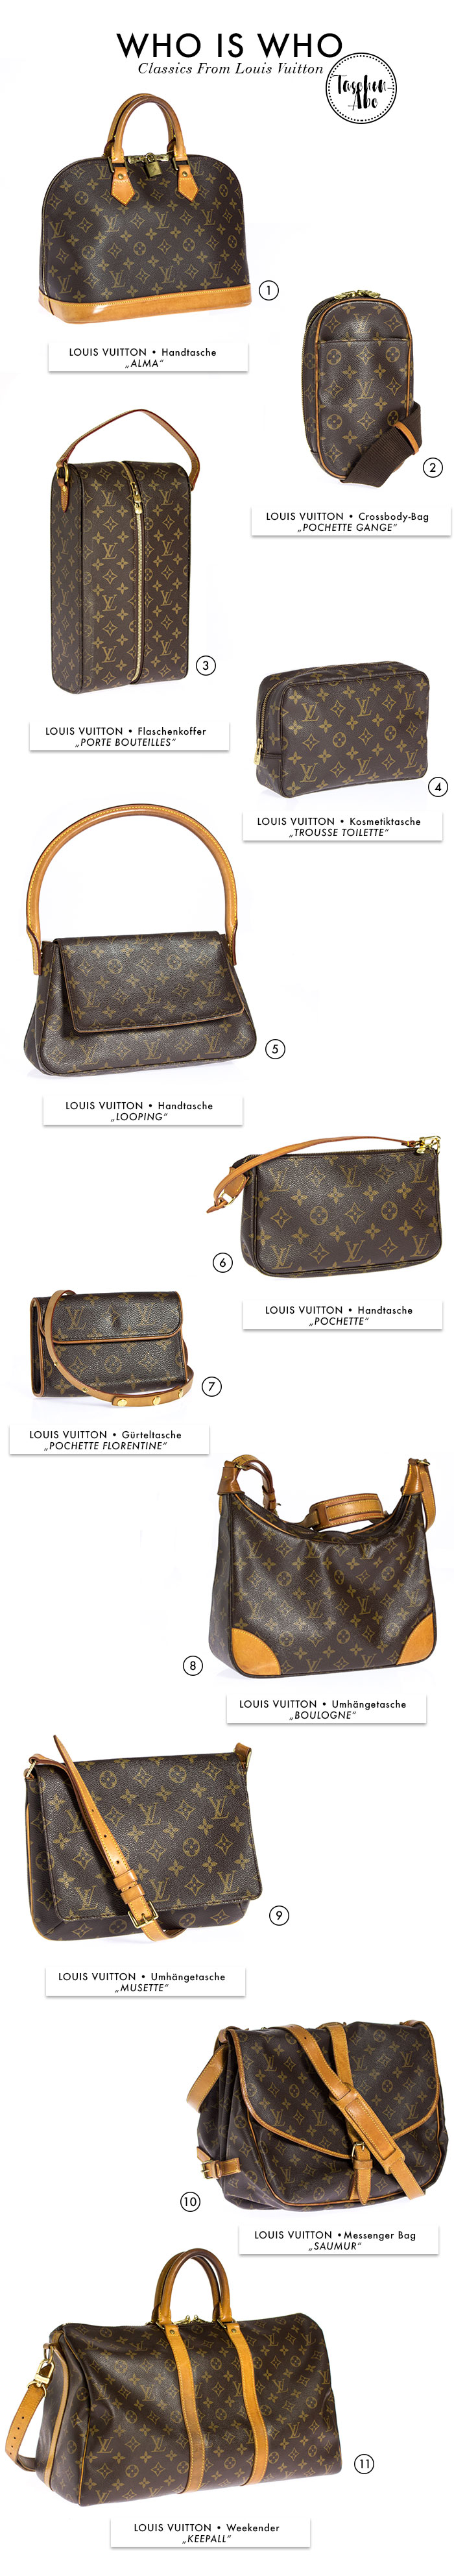 Louis Vuitton - Who is Who: Bags